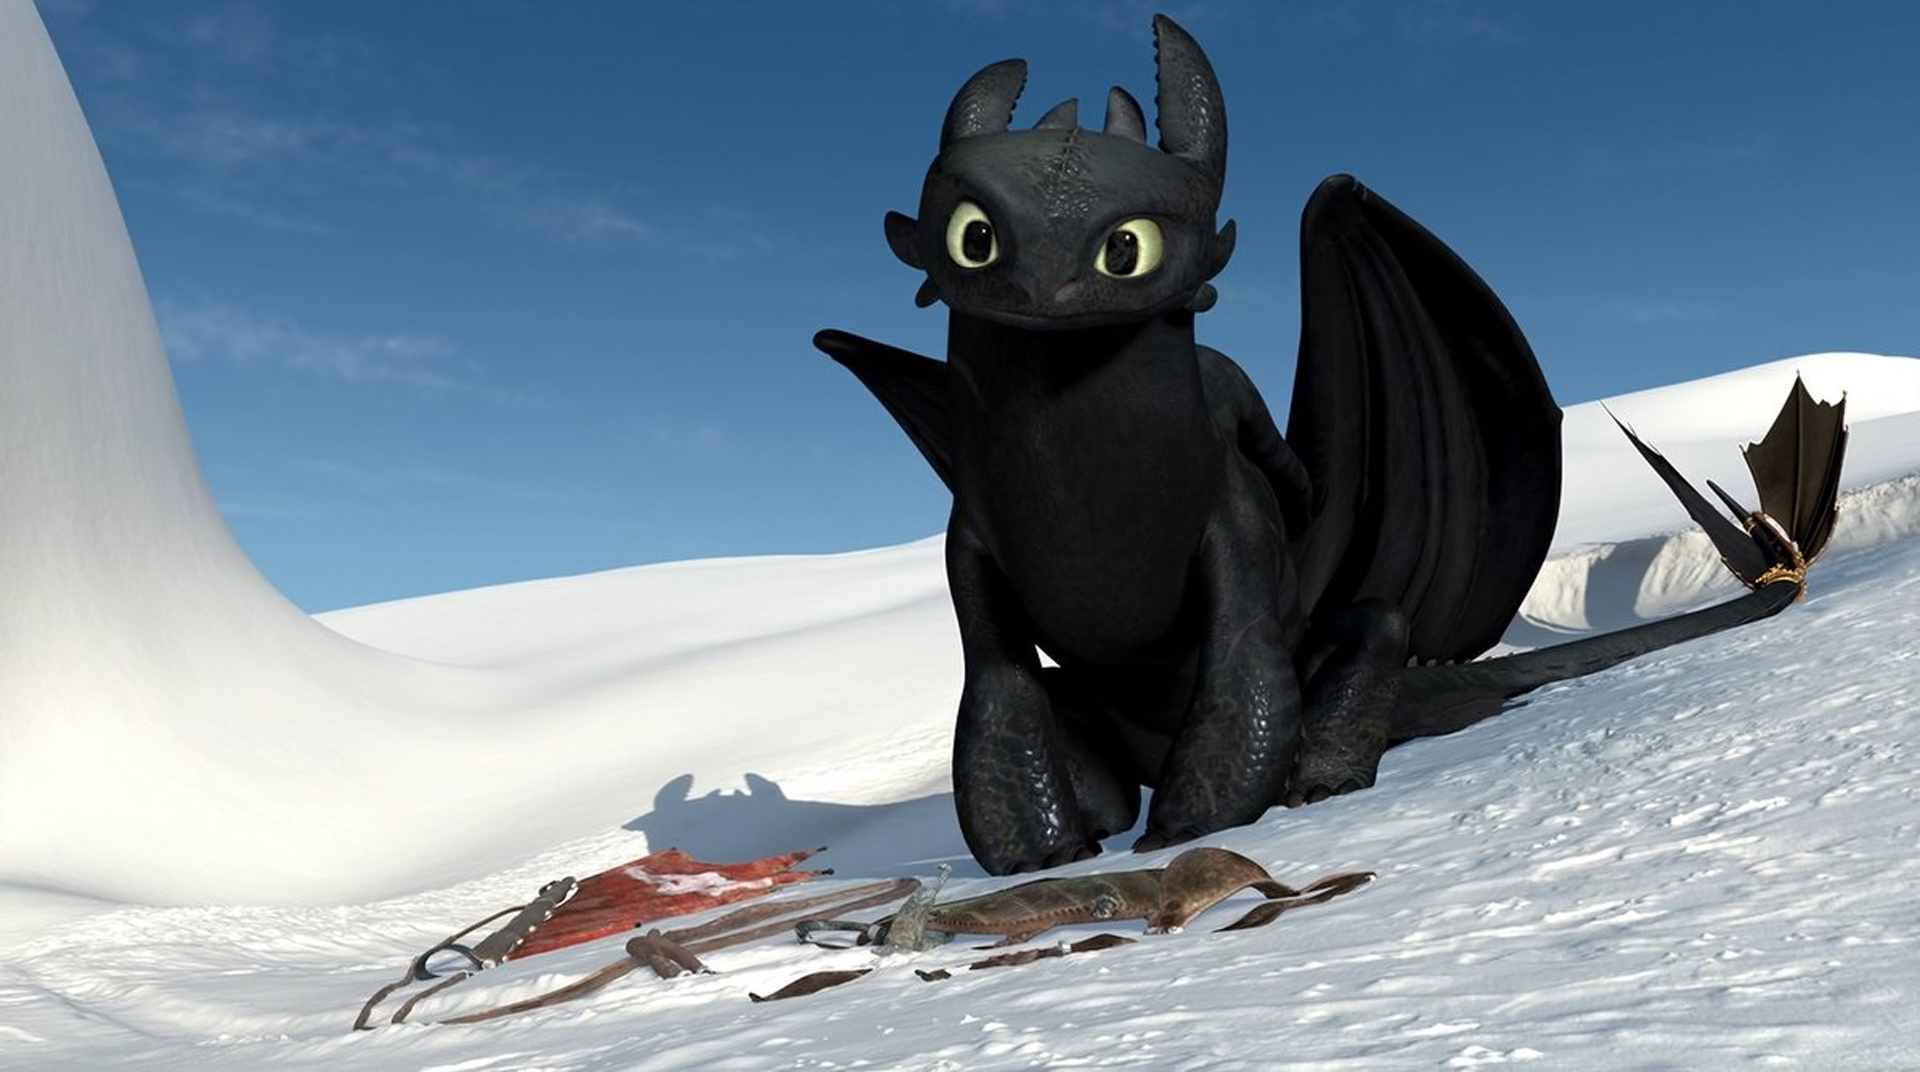 To Train Your Dragon Pictures Wallpaper And Desktop Background